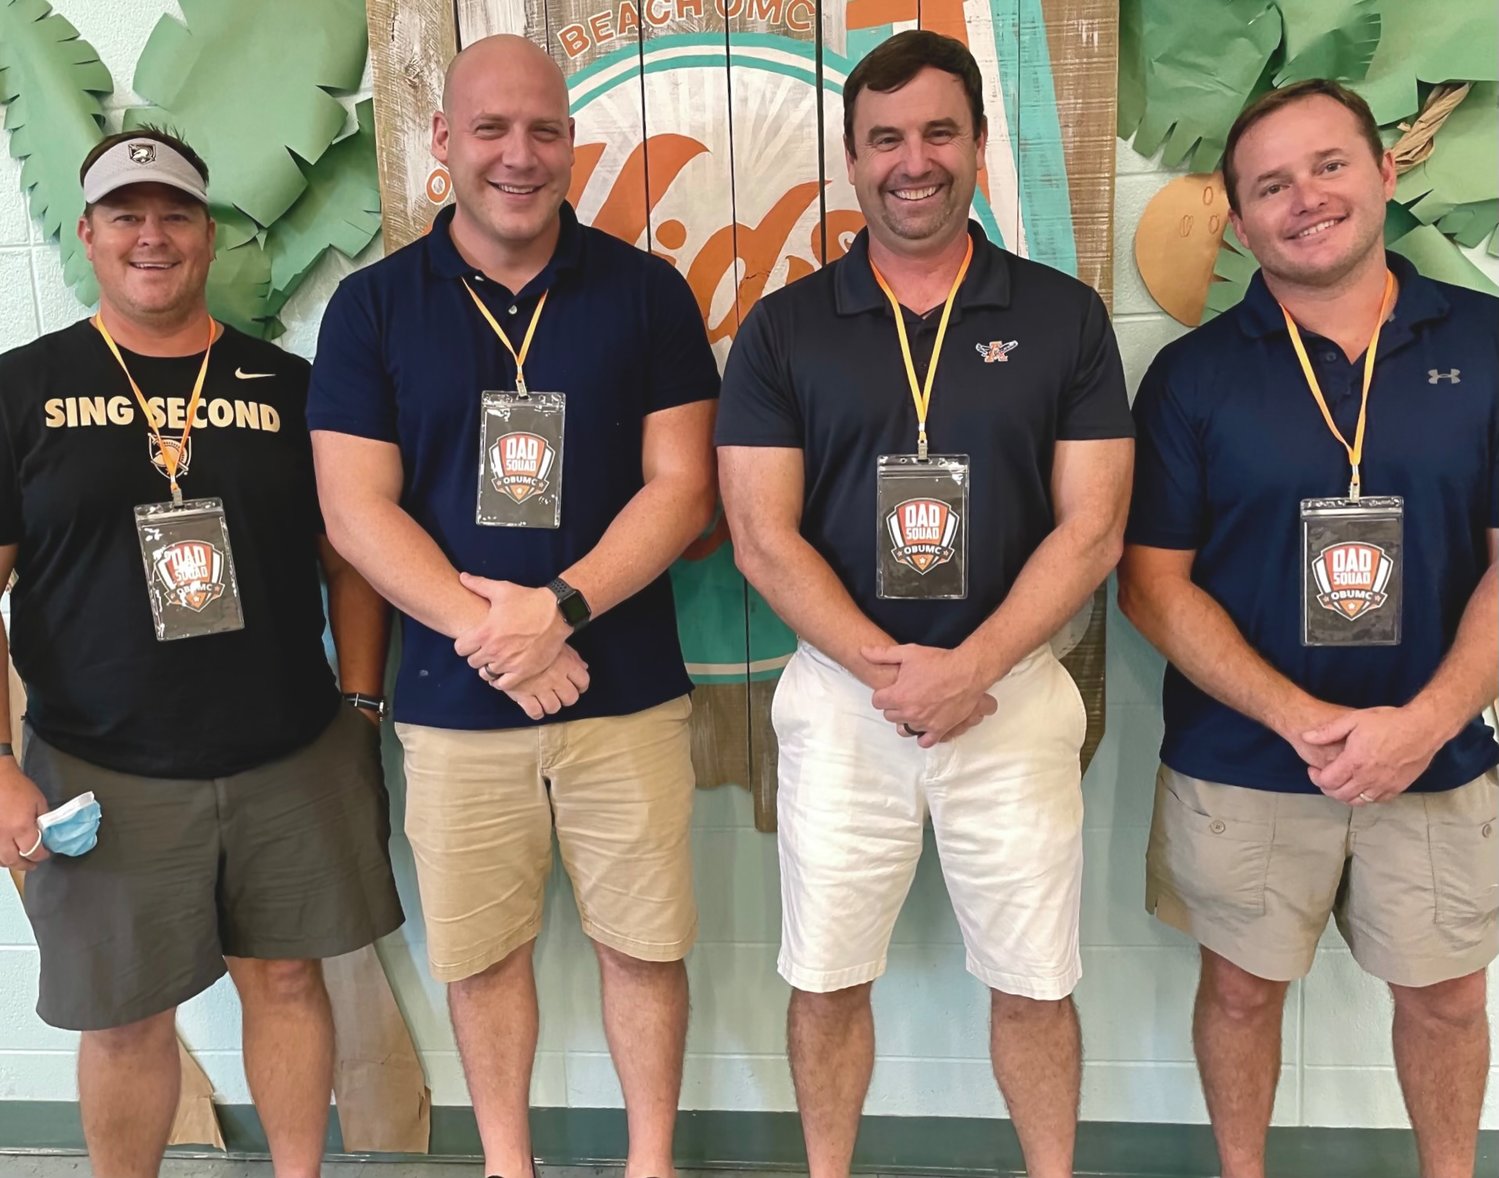 The Dad Squad visits Orange Beach Elementary every Friday to relieve teachers on lunch duty. The group also helps with a range of needs including reviewing multiplication facts with students, mentoring and classroom projects.